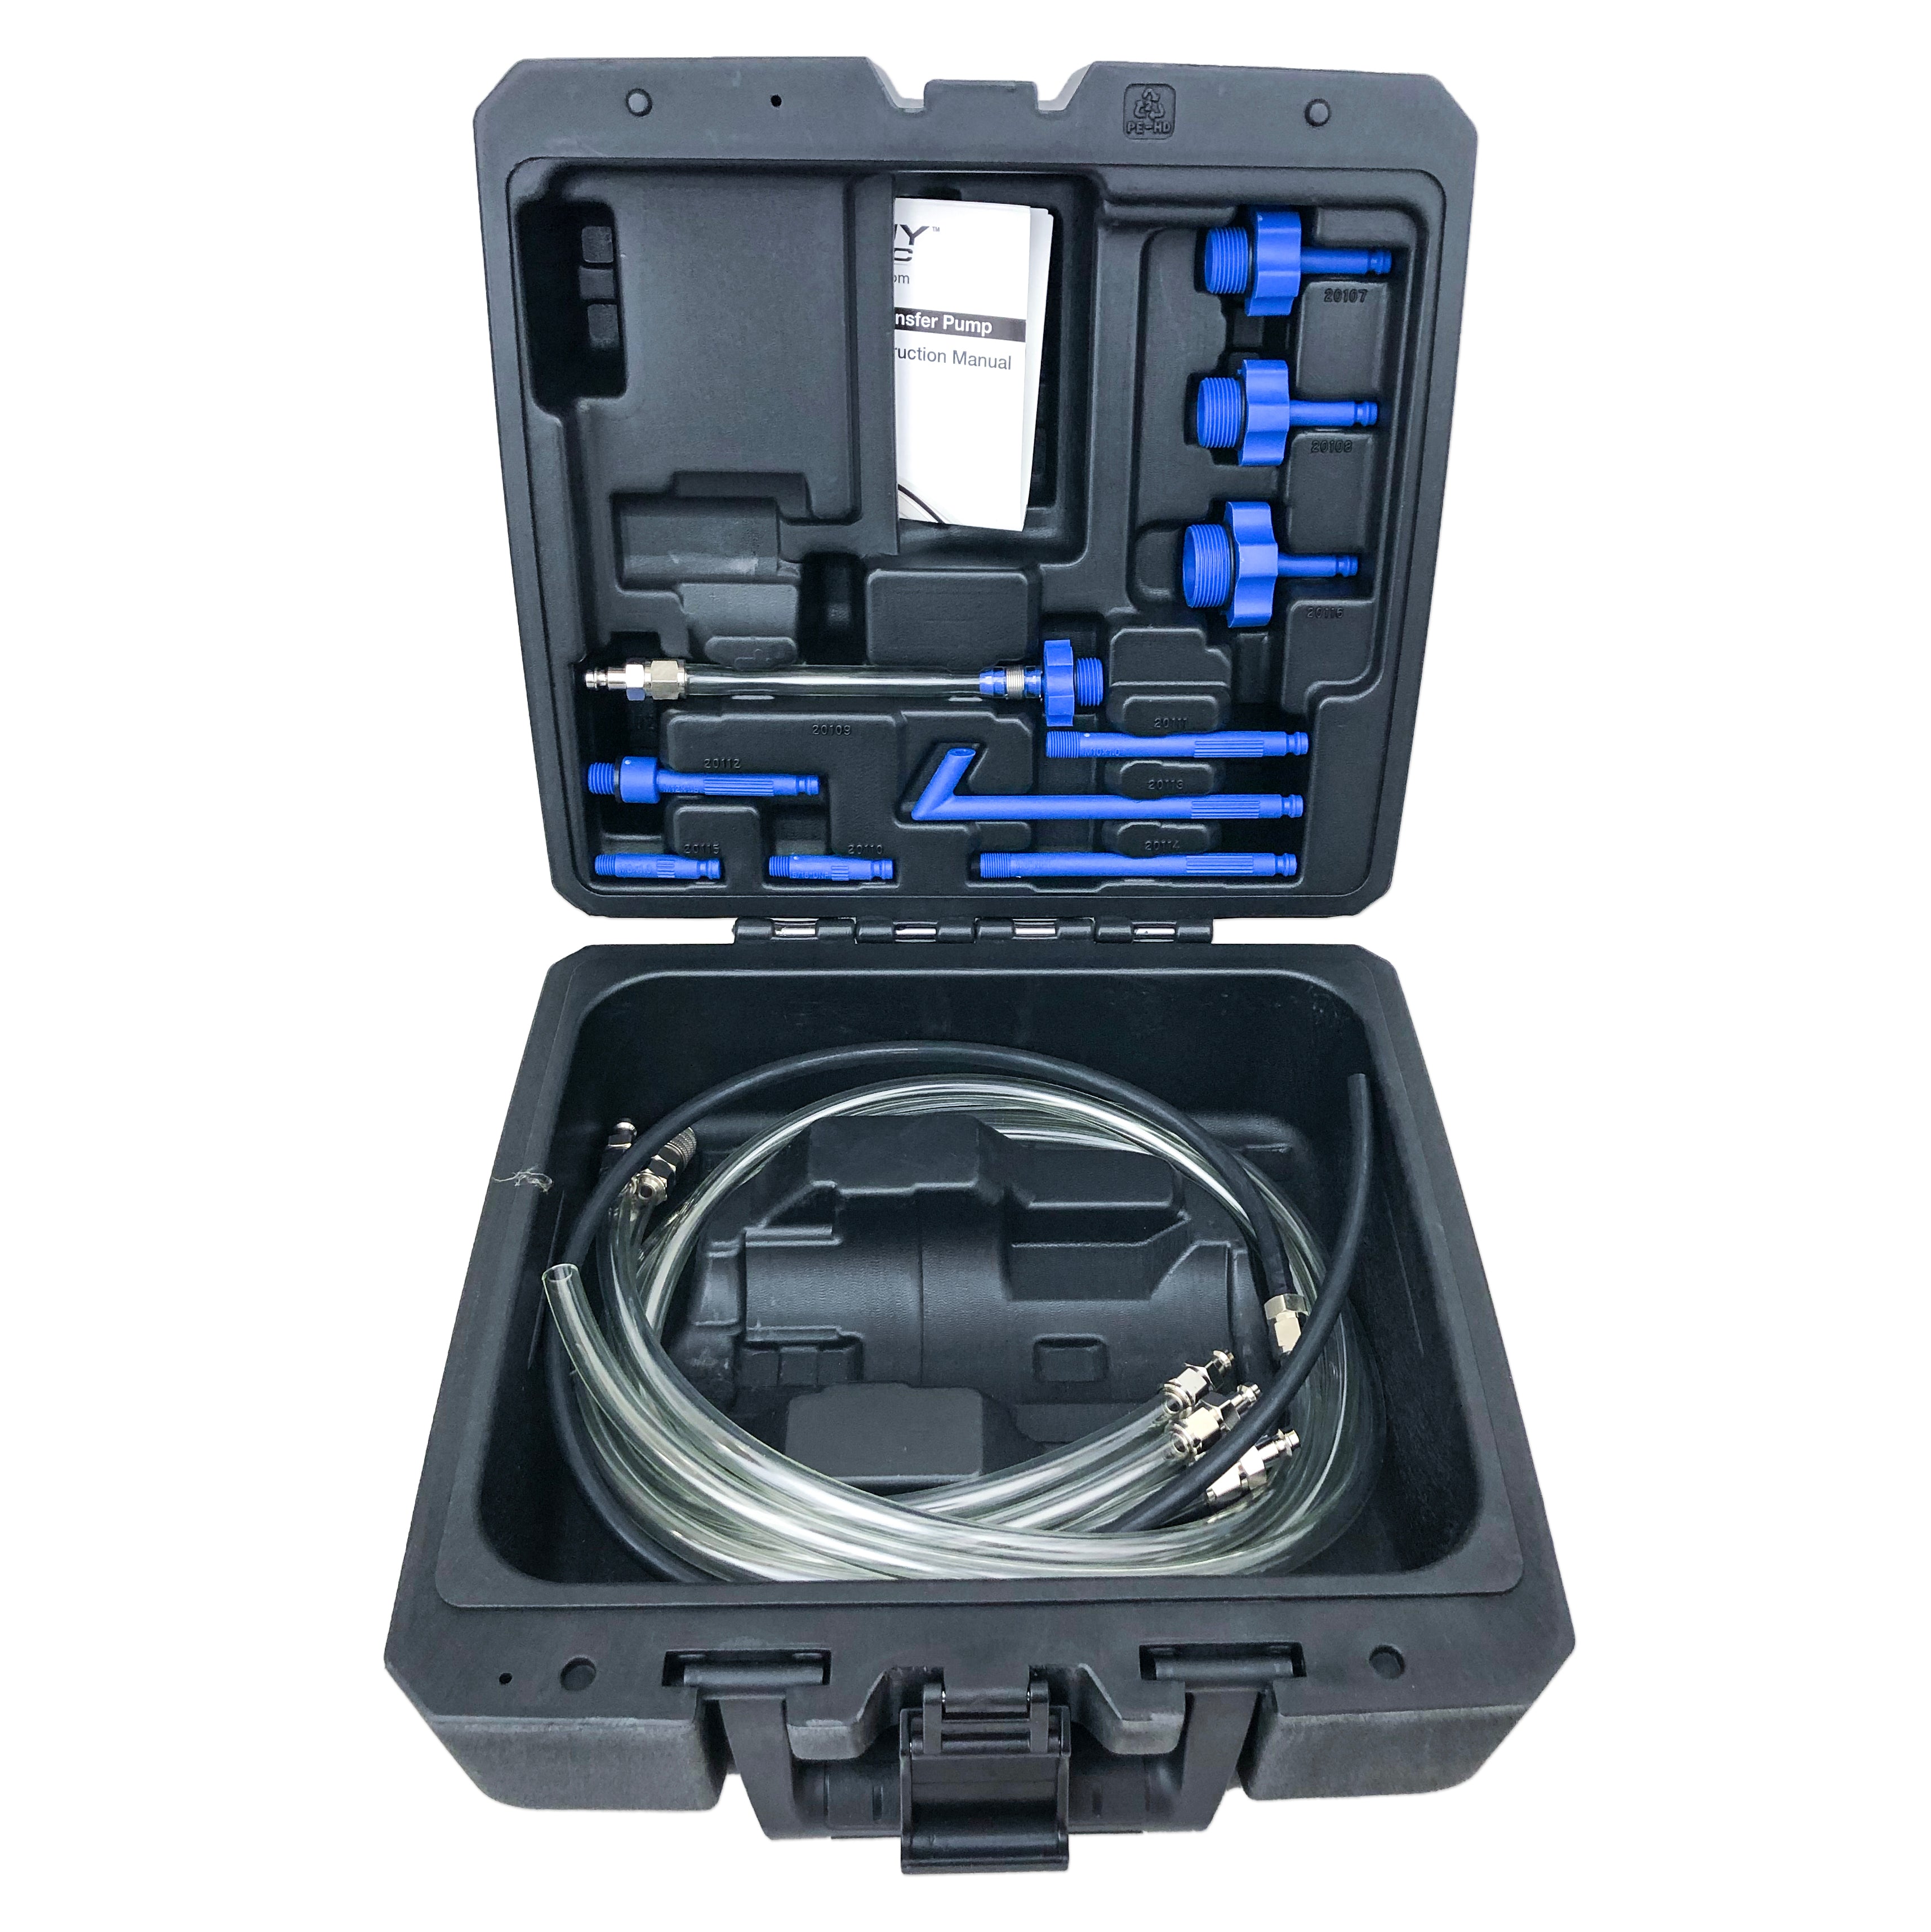 Fluid Transfer Pump Case with Transmission Adapters and Hoses (No Pump Included)